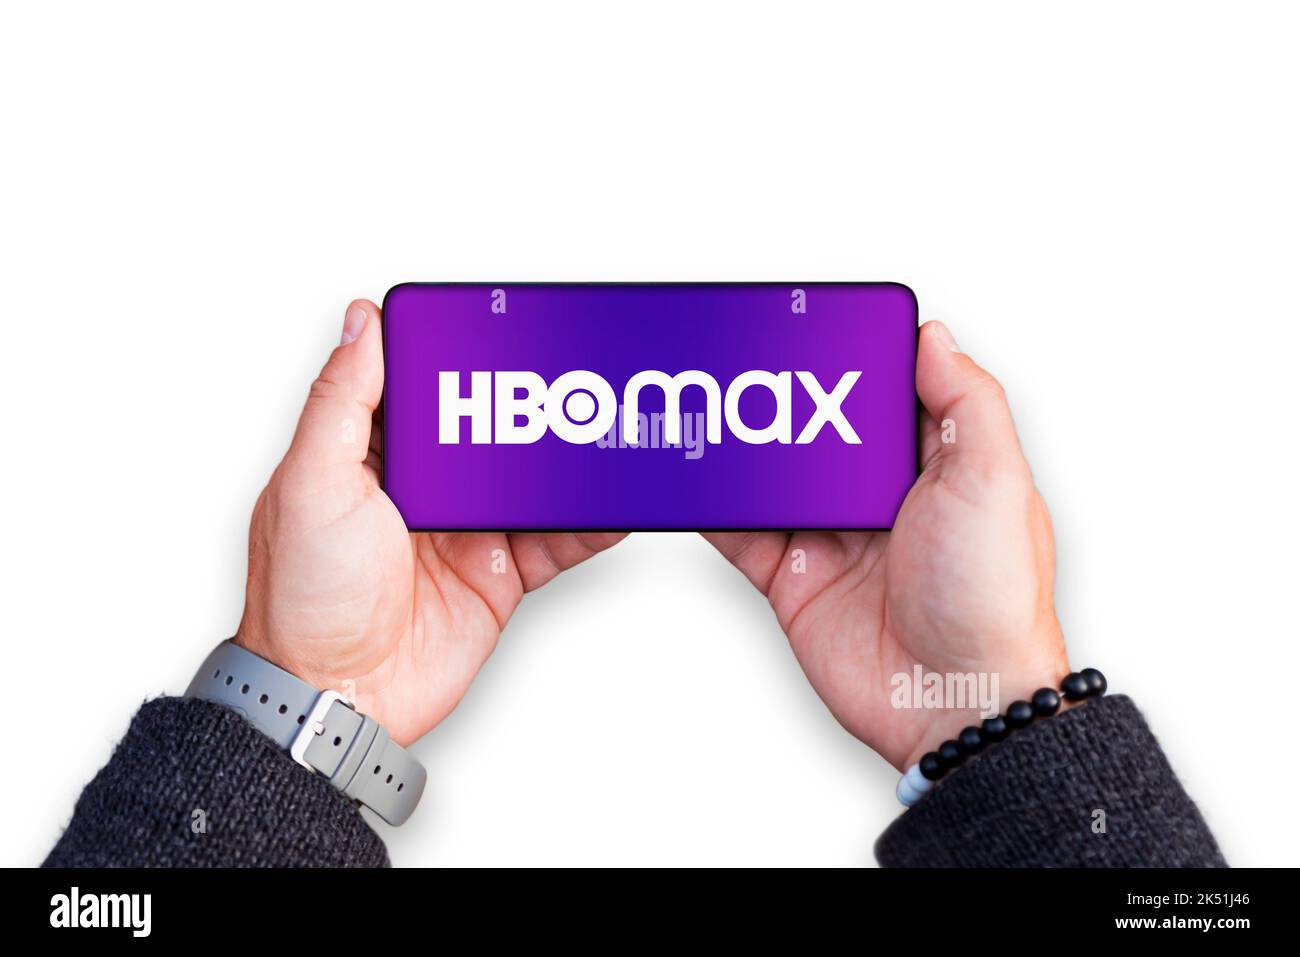 Belgrade, Serbia - October 05, 2022: Holding smartphone in hands with HBO logo on screen. HBO Max is an American subscription video on demand service Stock Photo